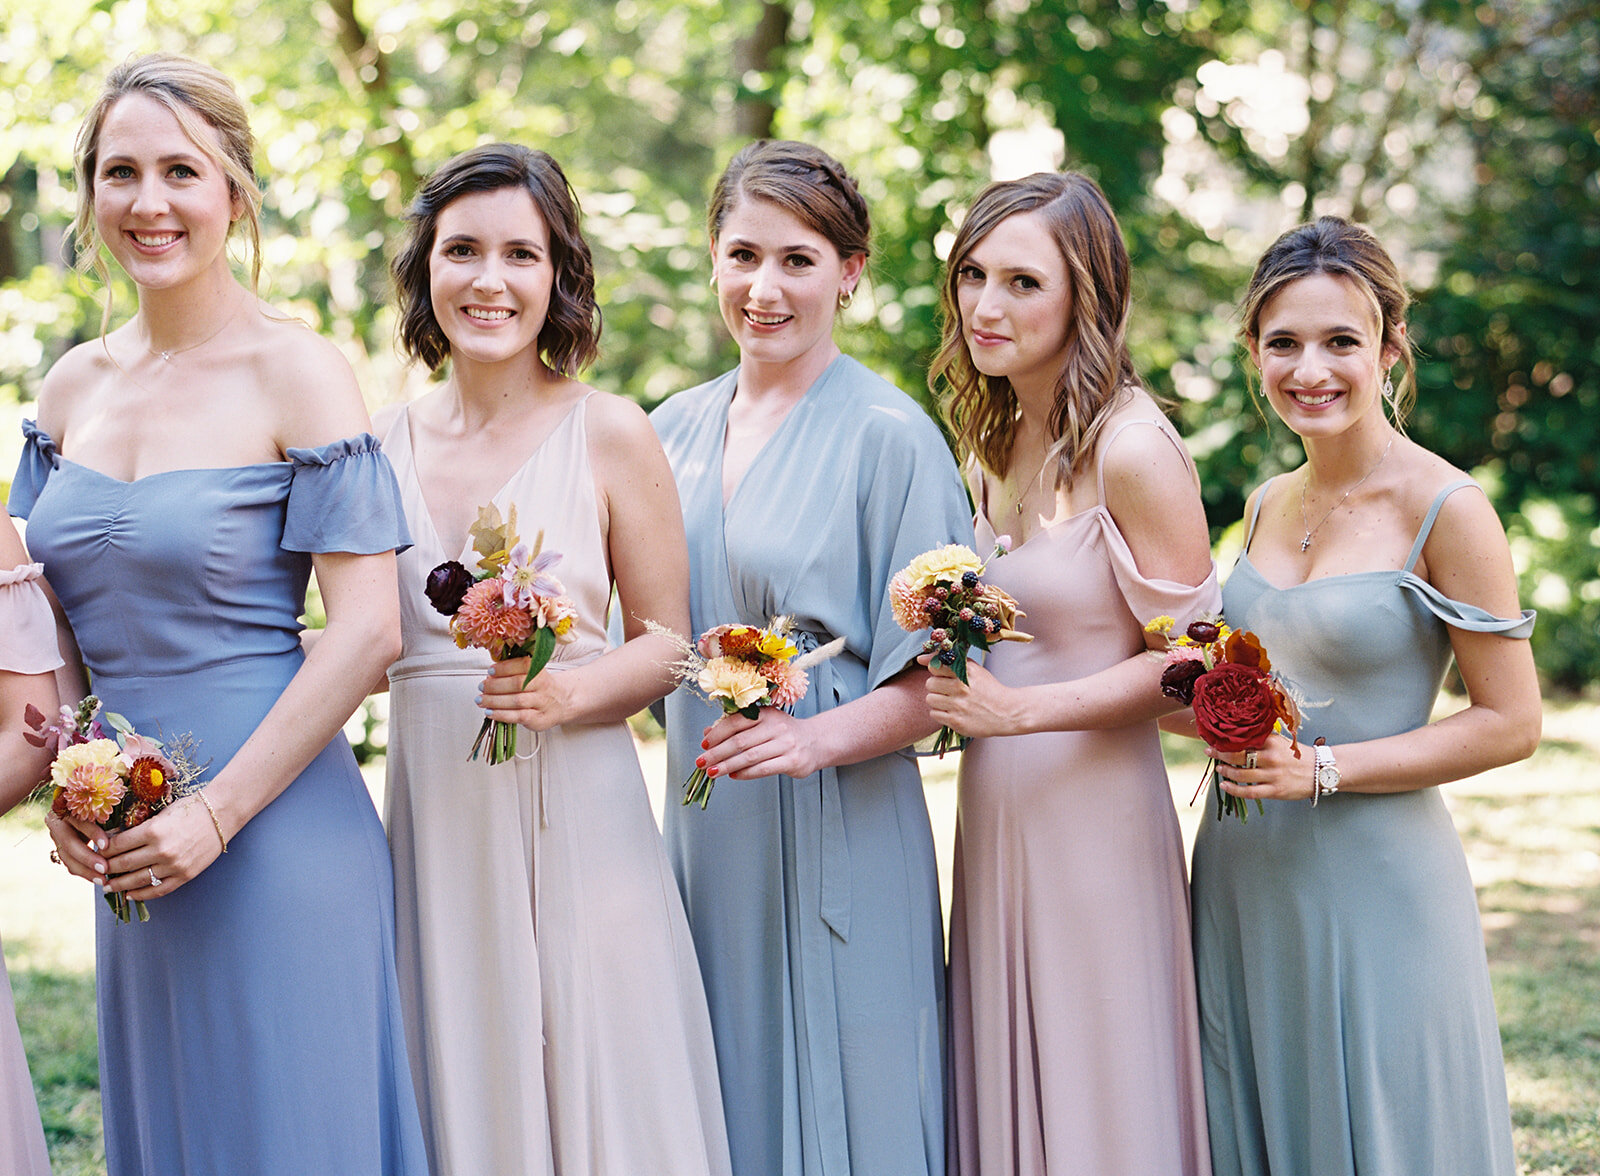 Bridesmaid dress in variety of pastel colors with brighter wildflower bouquets for an early fall wedding at RT Lodge. Flowers by Rosemary & Finch floral design, based in Nashville, TN.